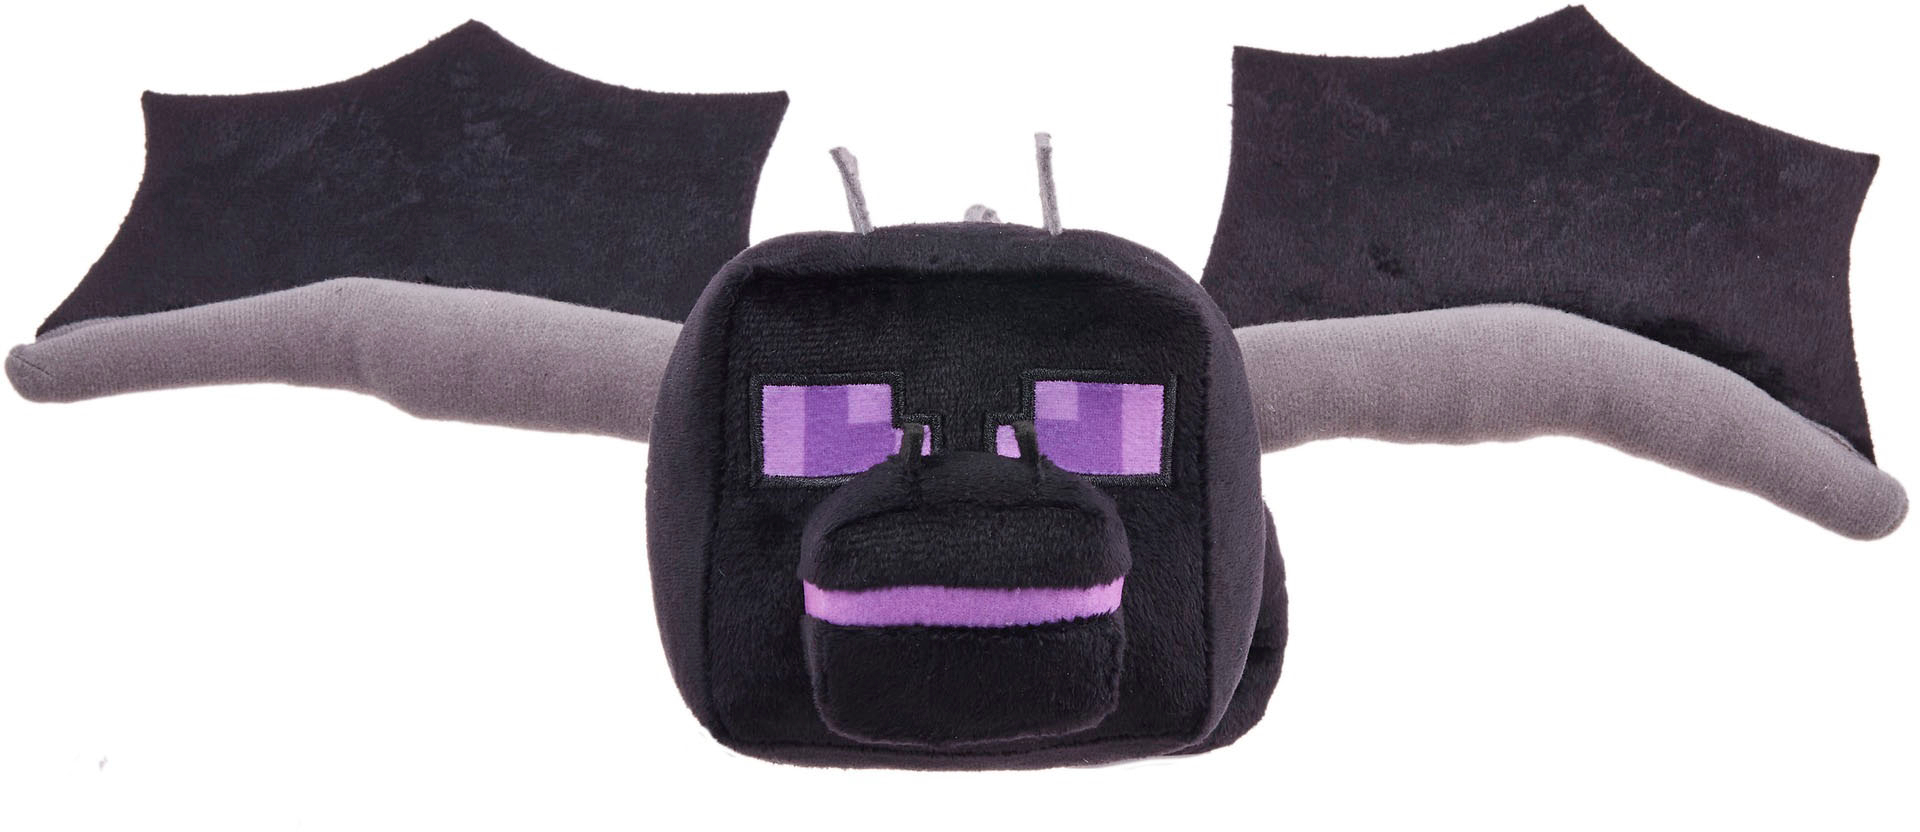 Minecraft Ender Dragon Lights and Sounds Plush Toy